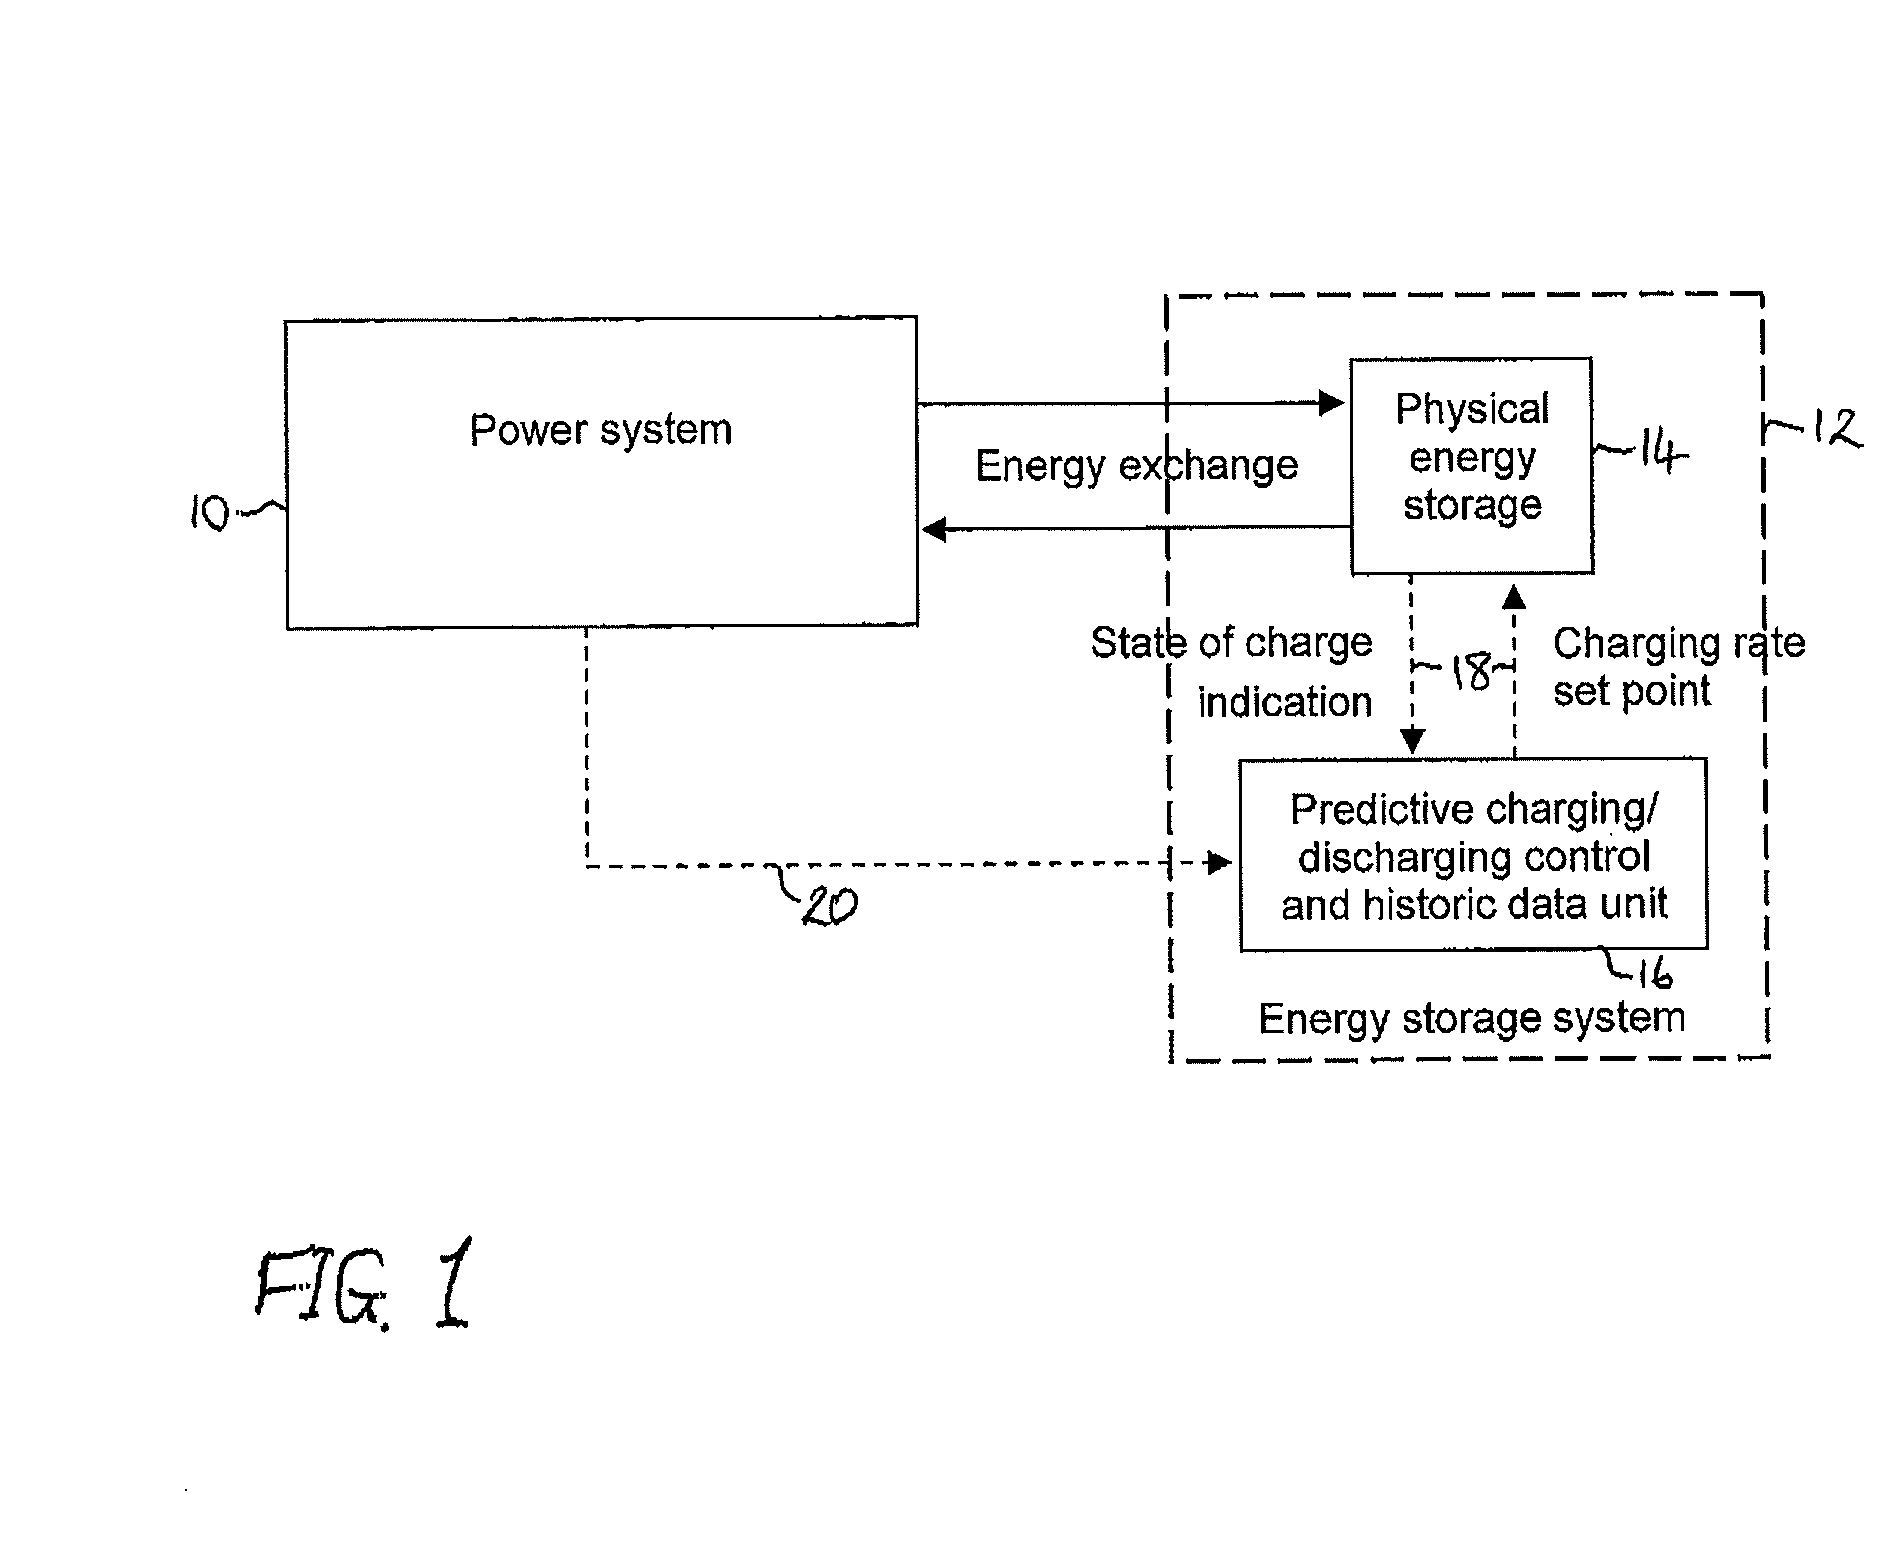 Method for operating an energy storage system